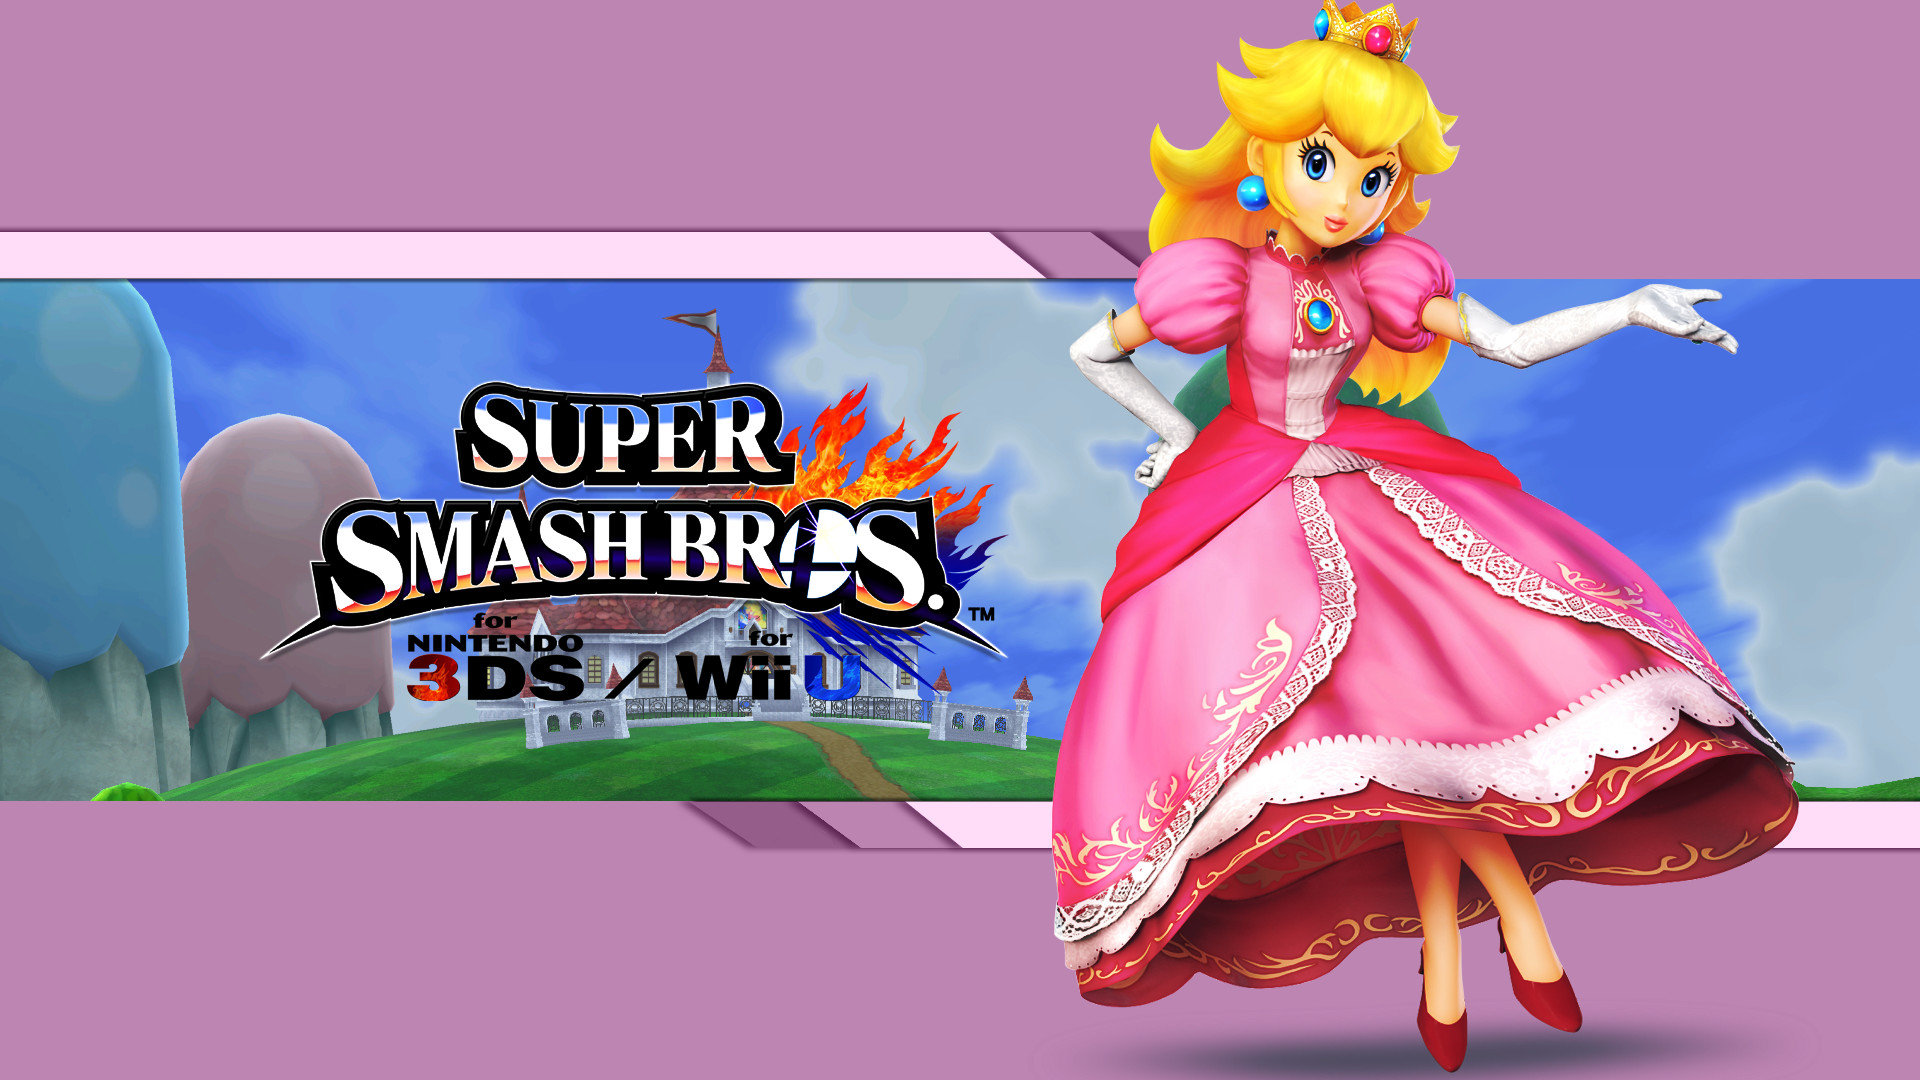 Awesome Super Smash Bros. free wallpaper ID:330814 for hd 1920x1080 computer